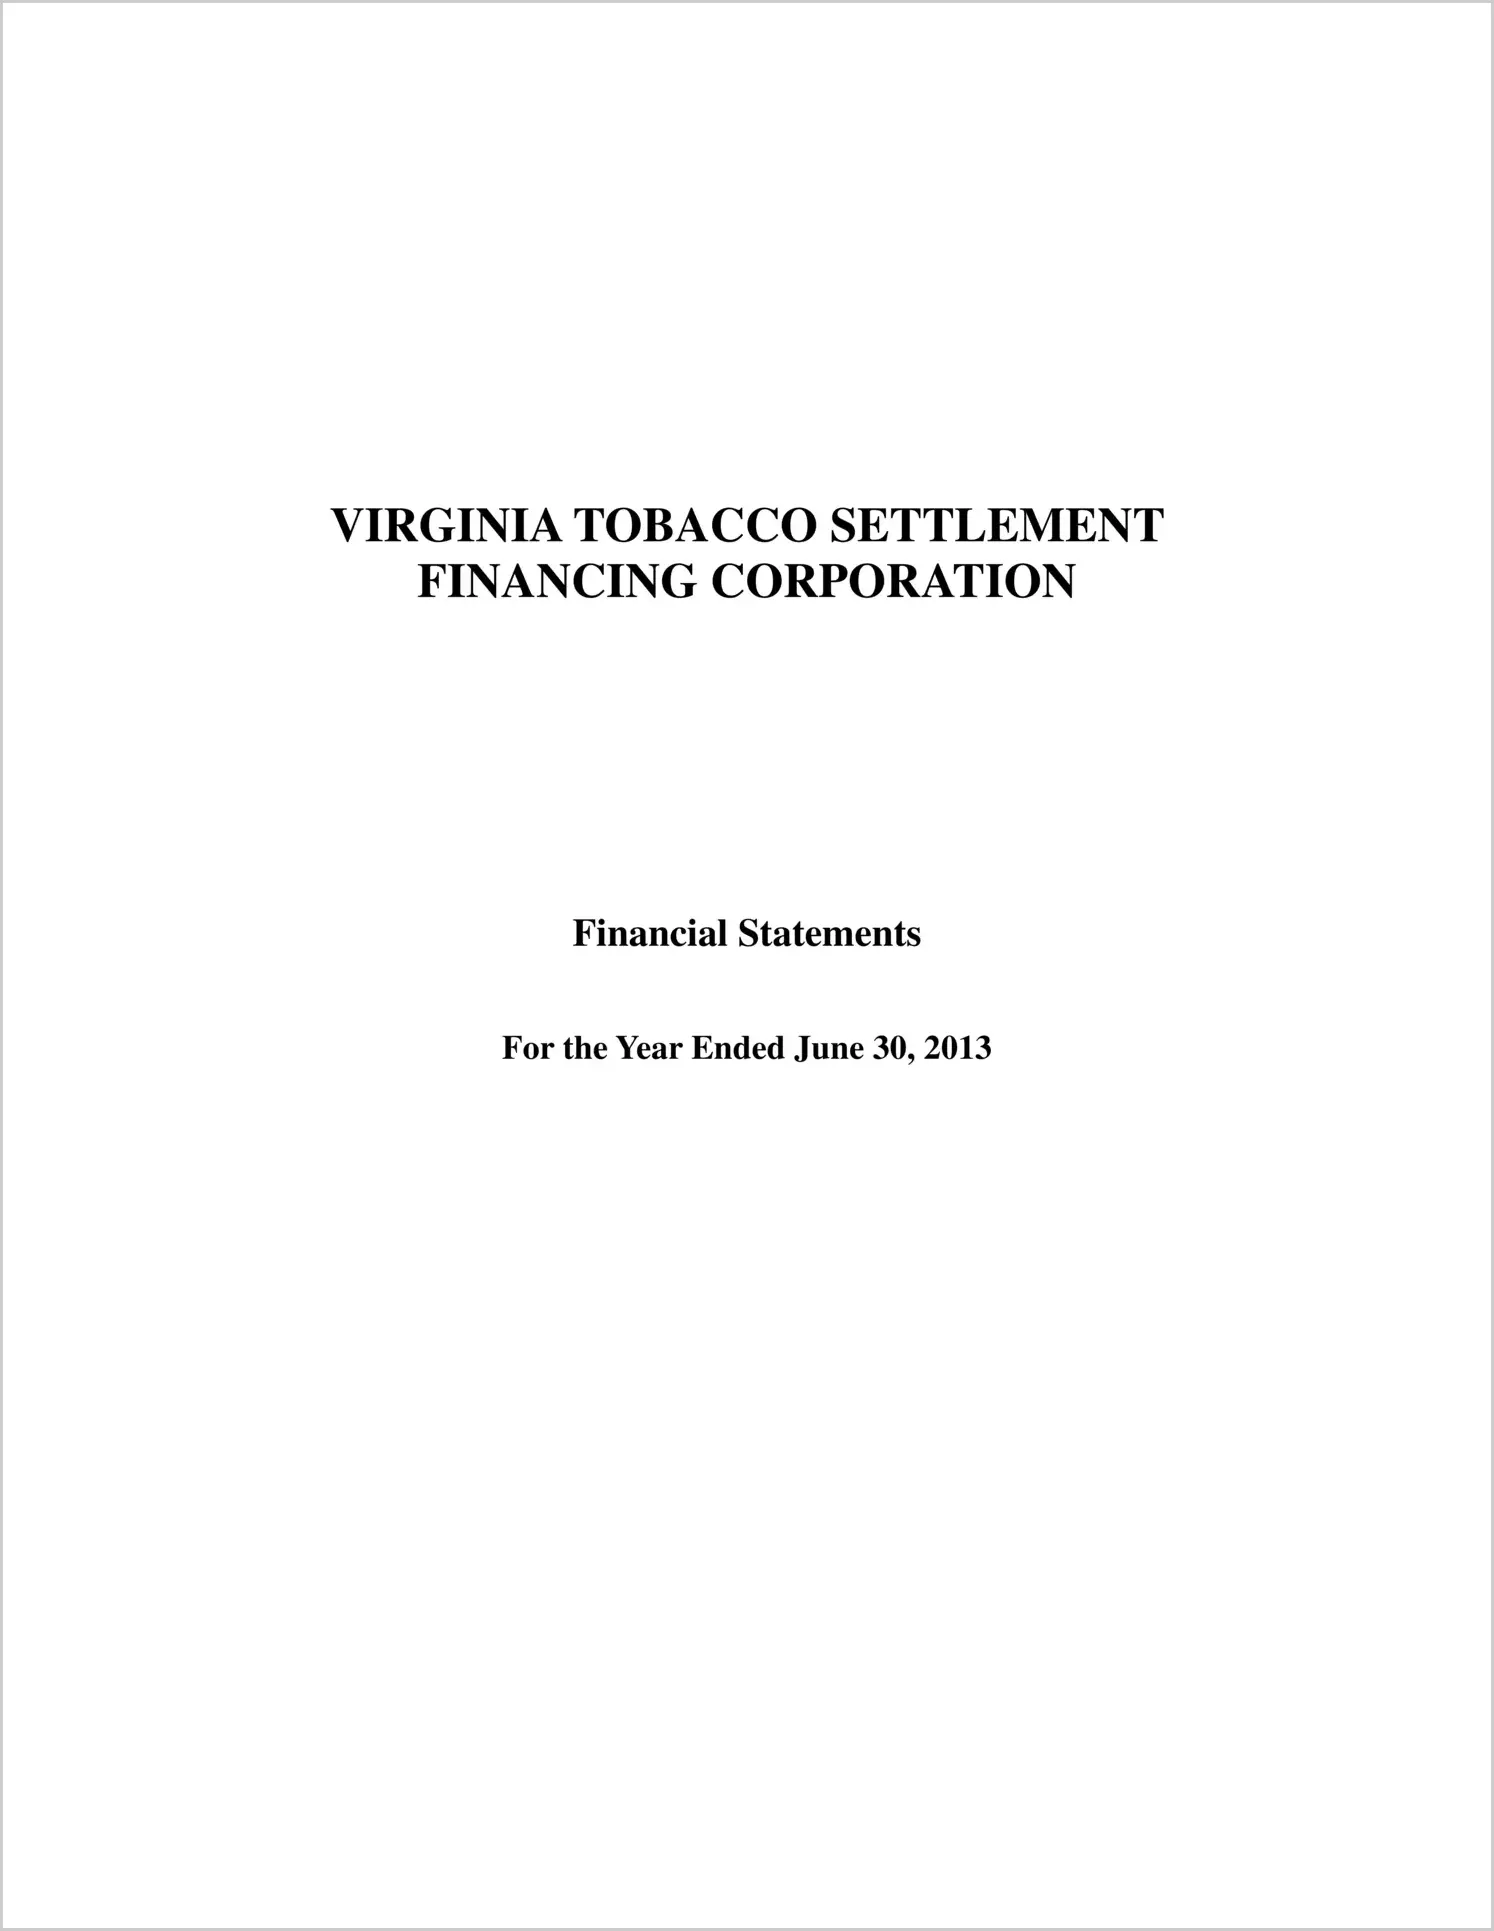 Virginia Tobacco Settlement Financing Corporation for the year ended June 30, 2013